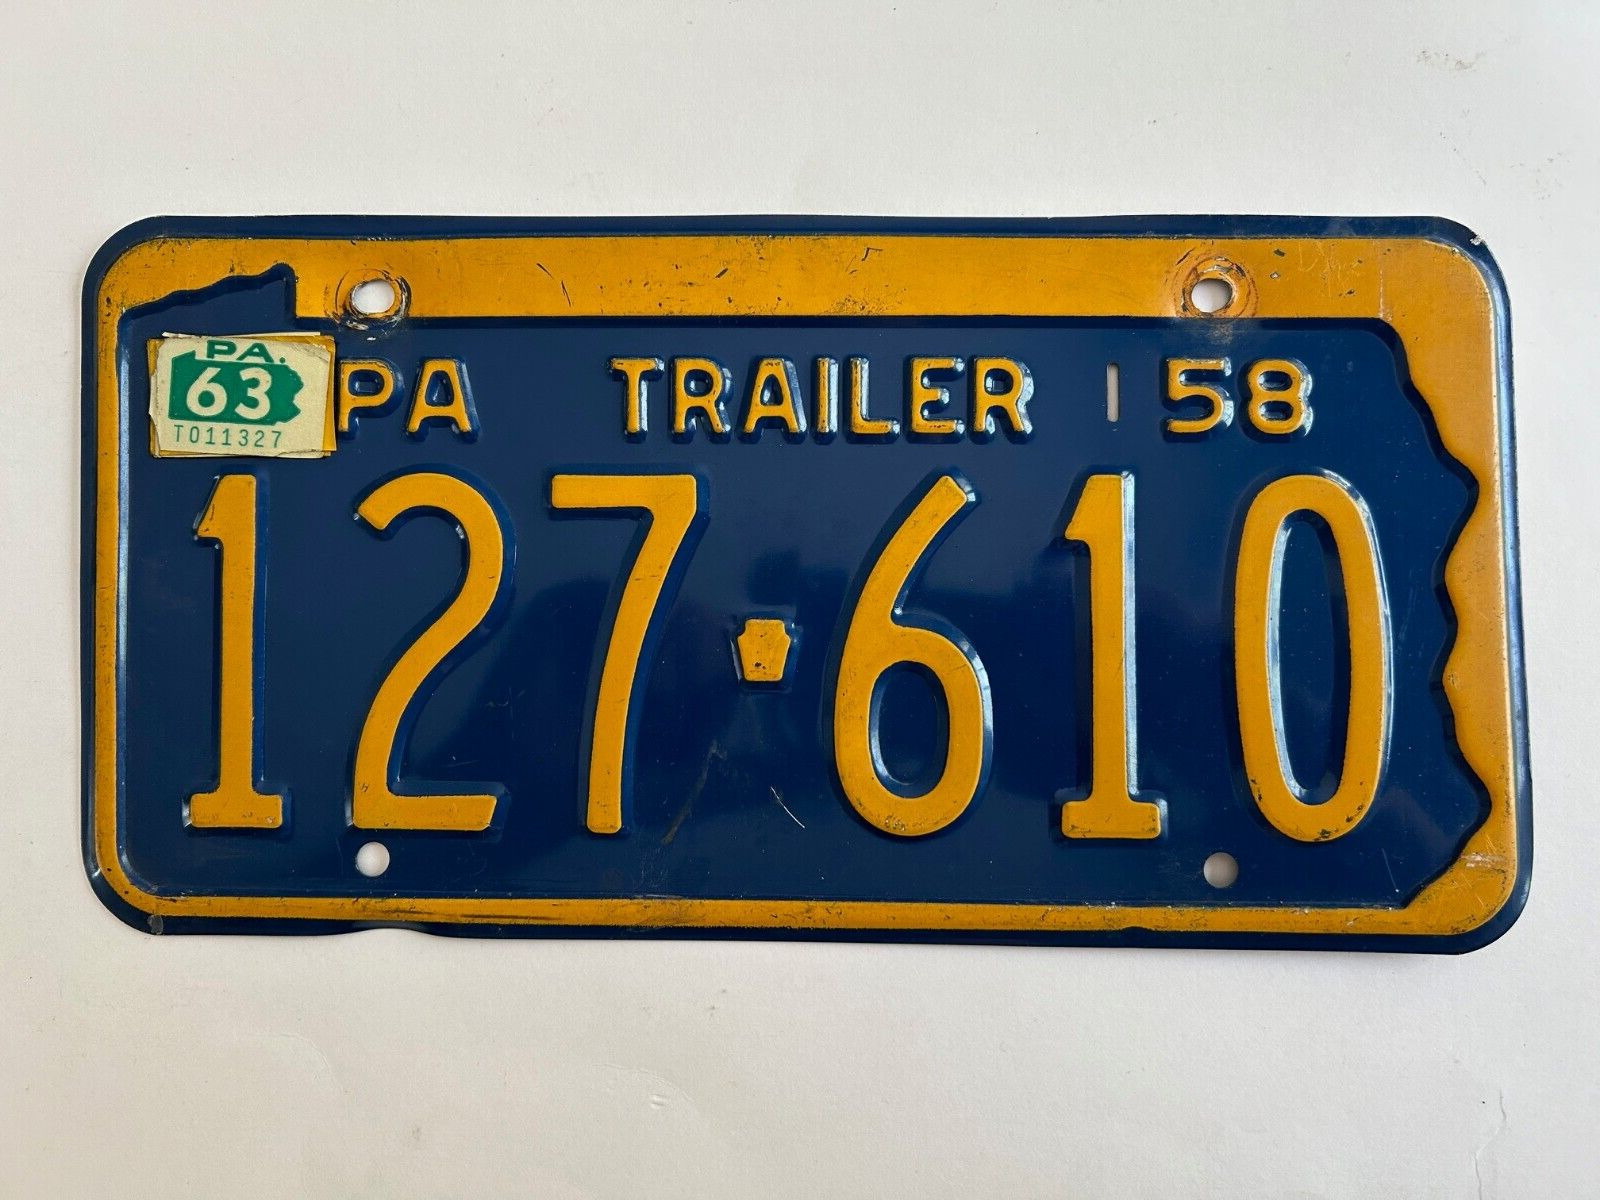 1963 Pennsylvania License Plate TRAILER, Year Stickers on 1958 dated base